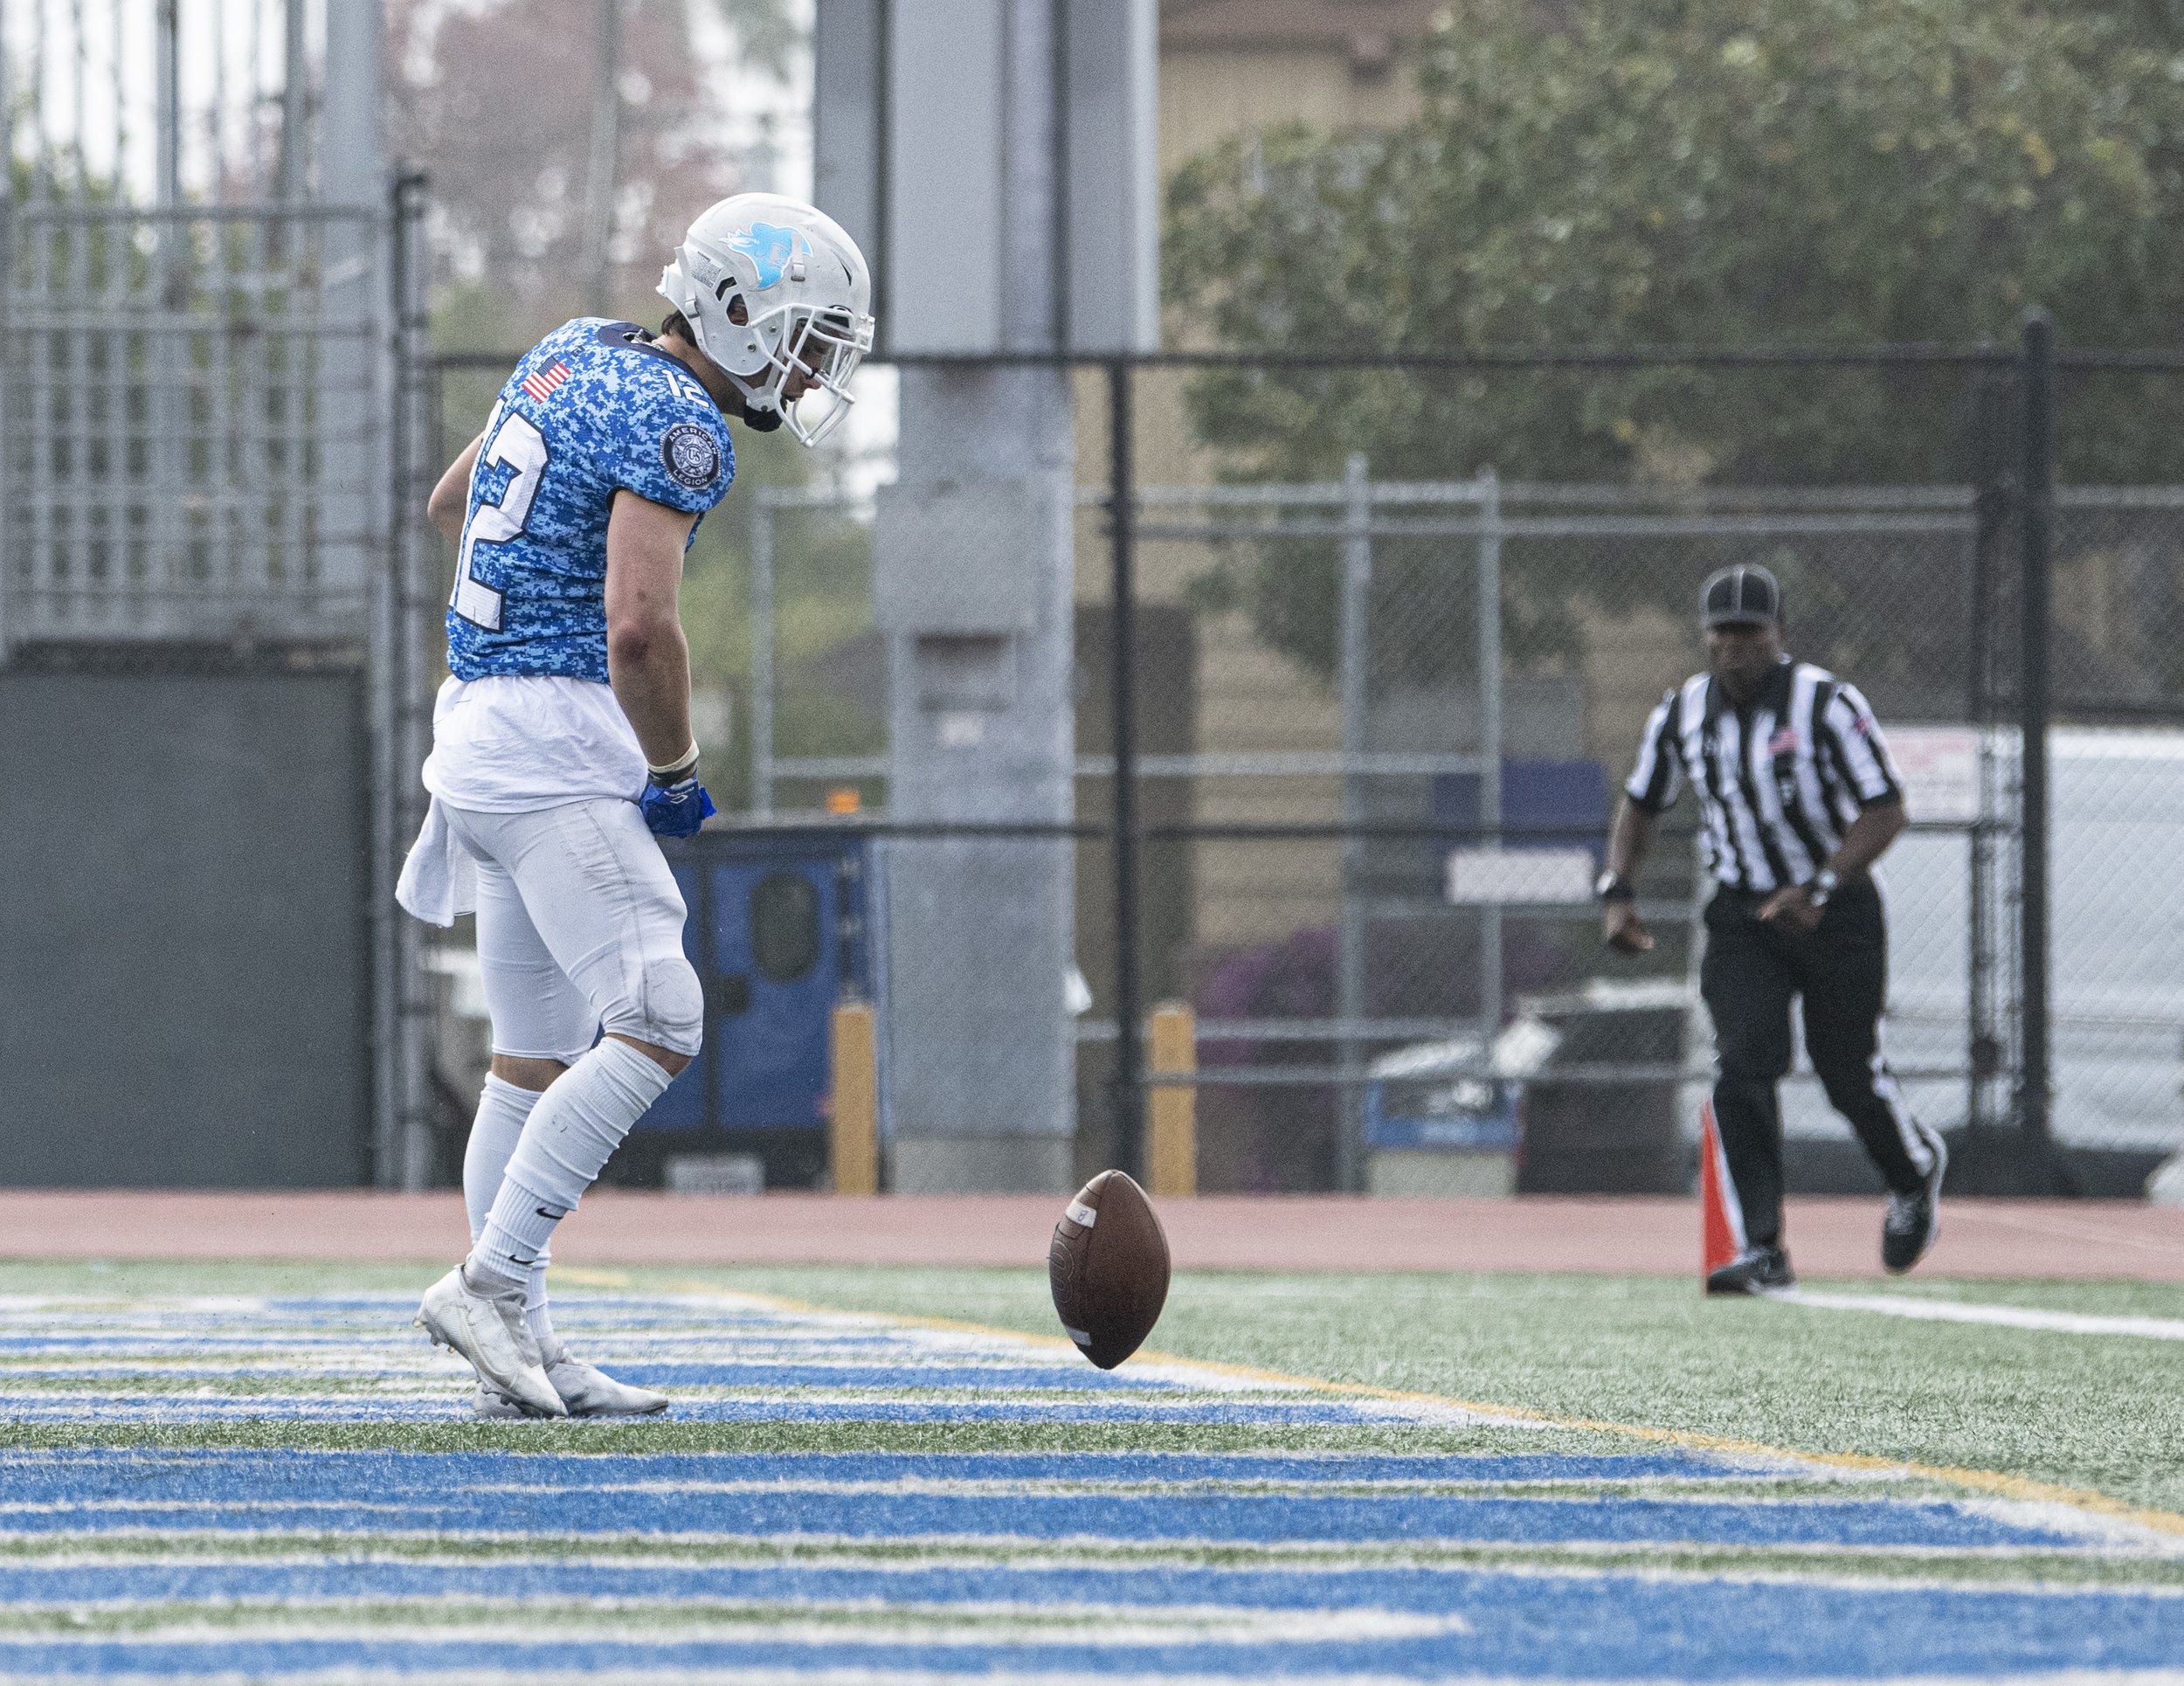  Santa Monica College Corsairs freshman WR Gunnison Bloodgood (12) spins the ball in the endzone after making a difficult touchdown at LA Valley. He was penalized 15 yards for unsportsmanlike conduct. (Jon Putman | The Corsair) 